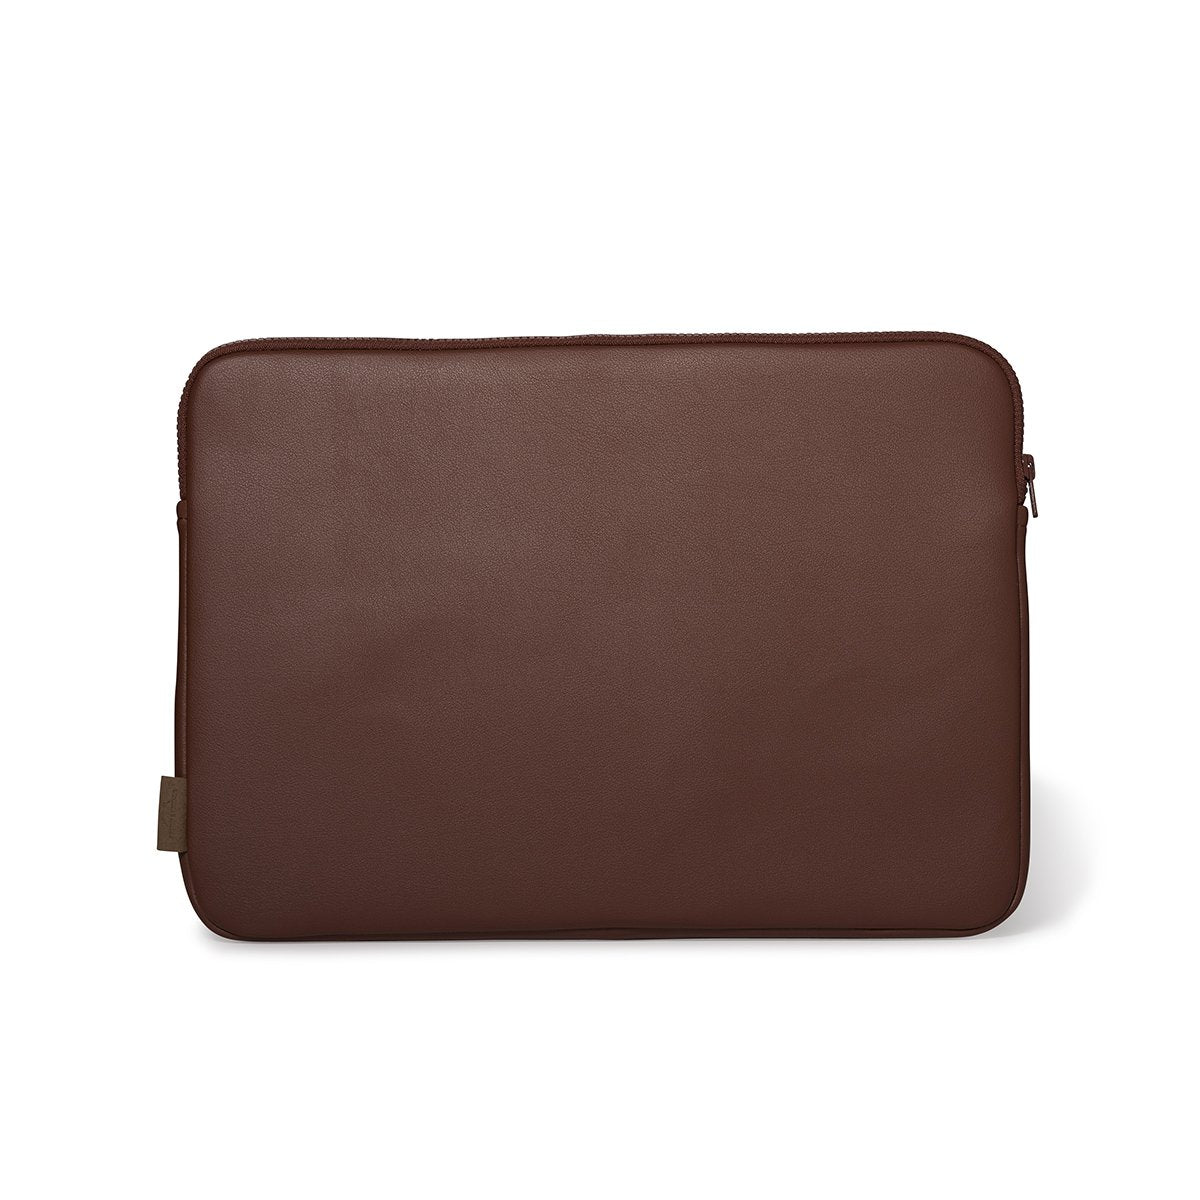 BROWN Faux Leather 15 Inch Laptop Cover